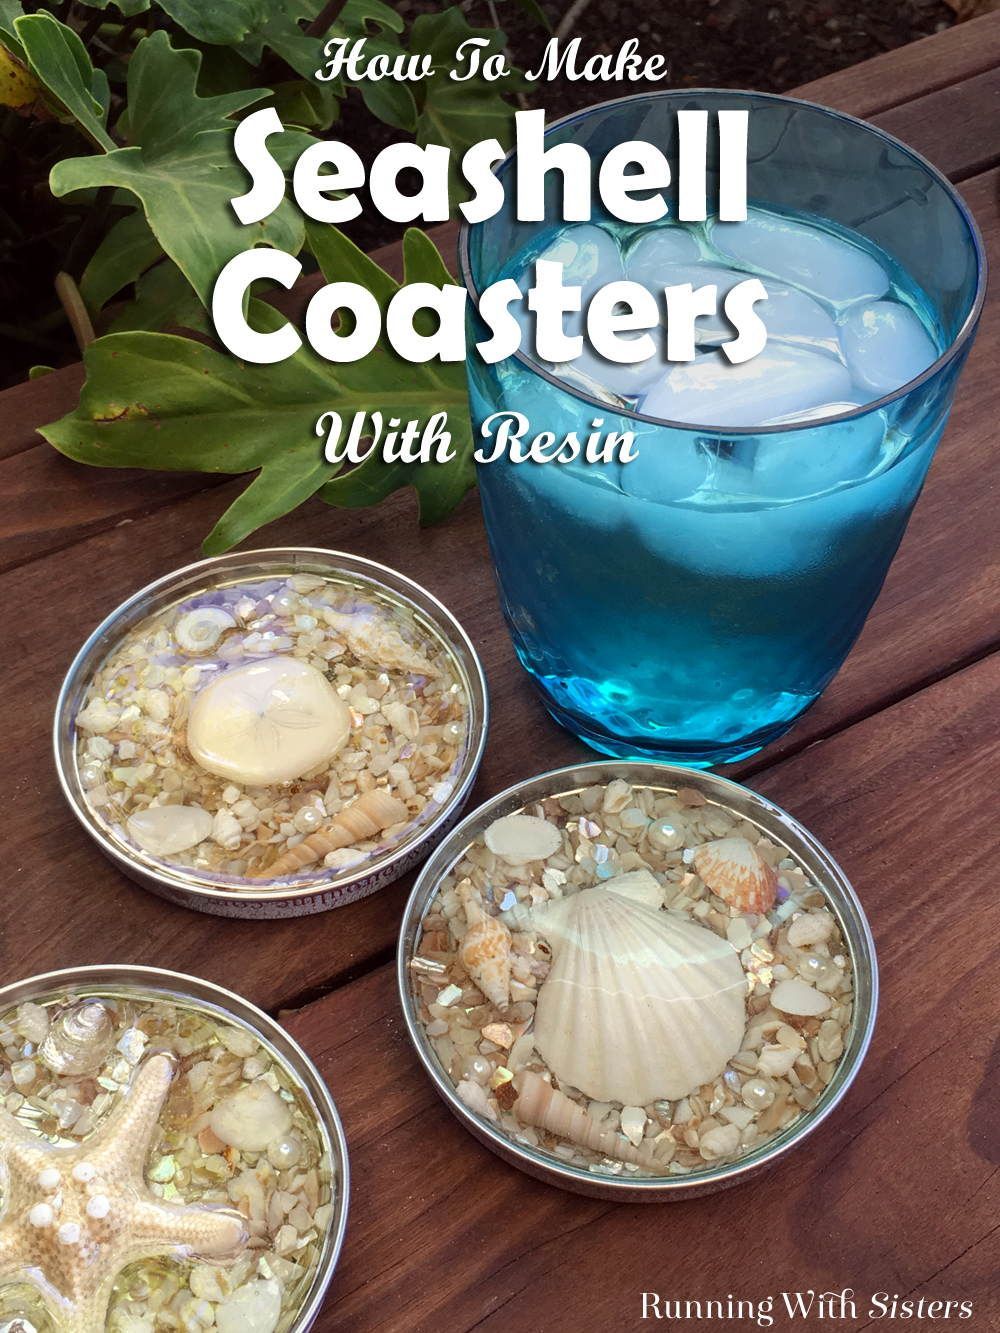 Make seashell coasters with resin. We’ll show you how to turn jar lids into coasters with pretty shells. We even have a video